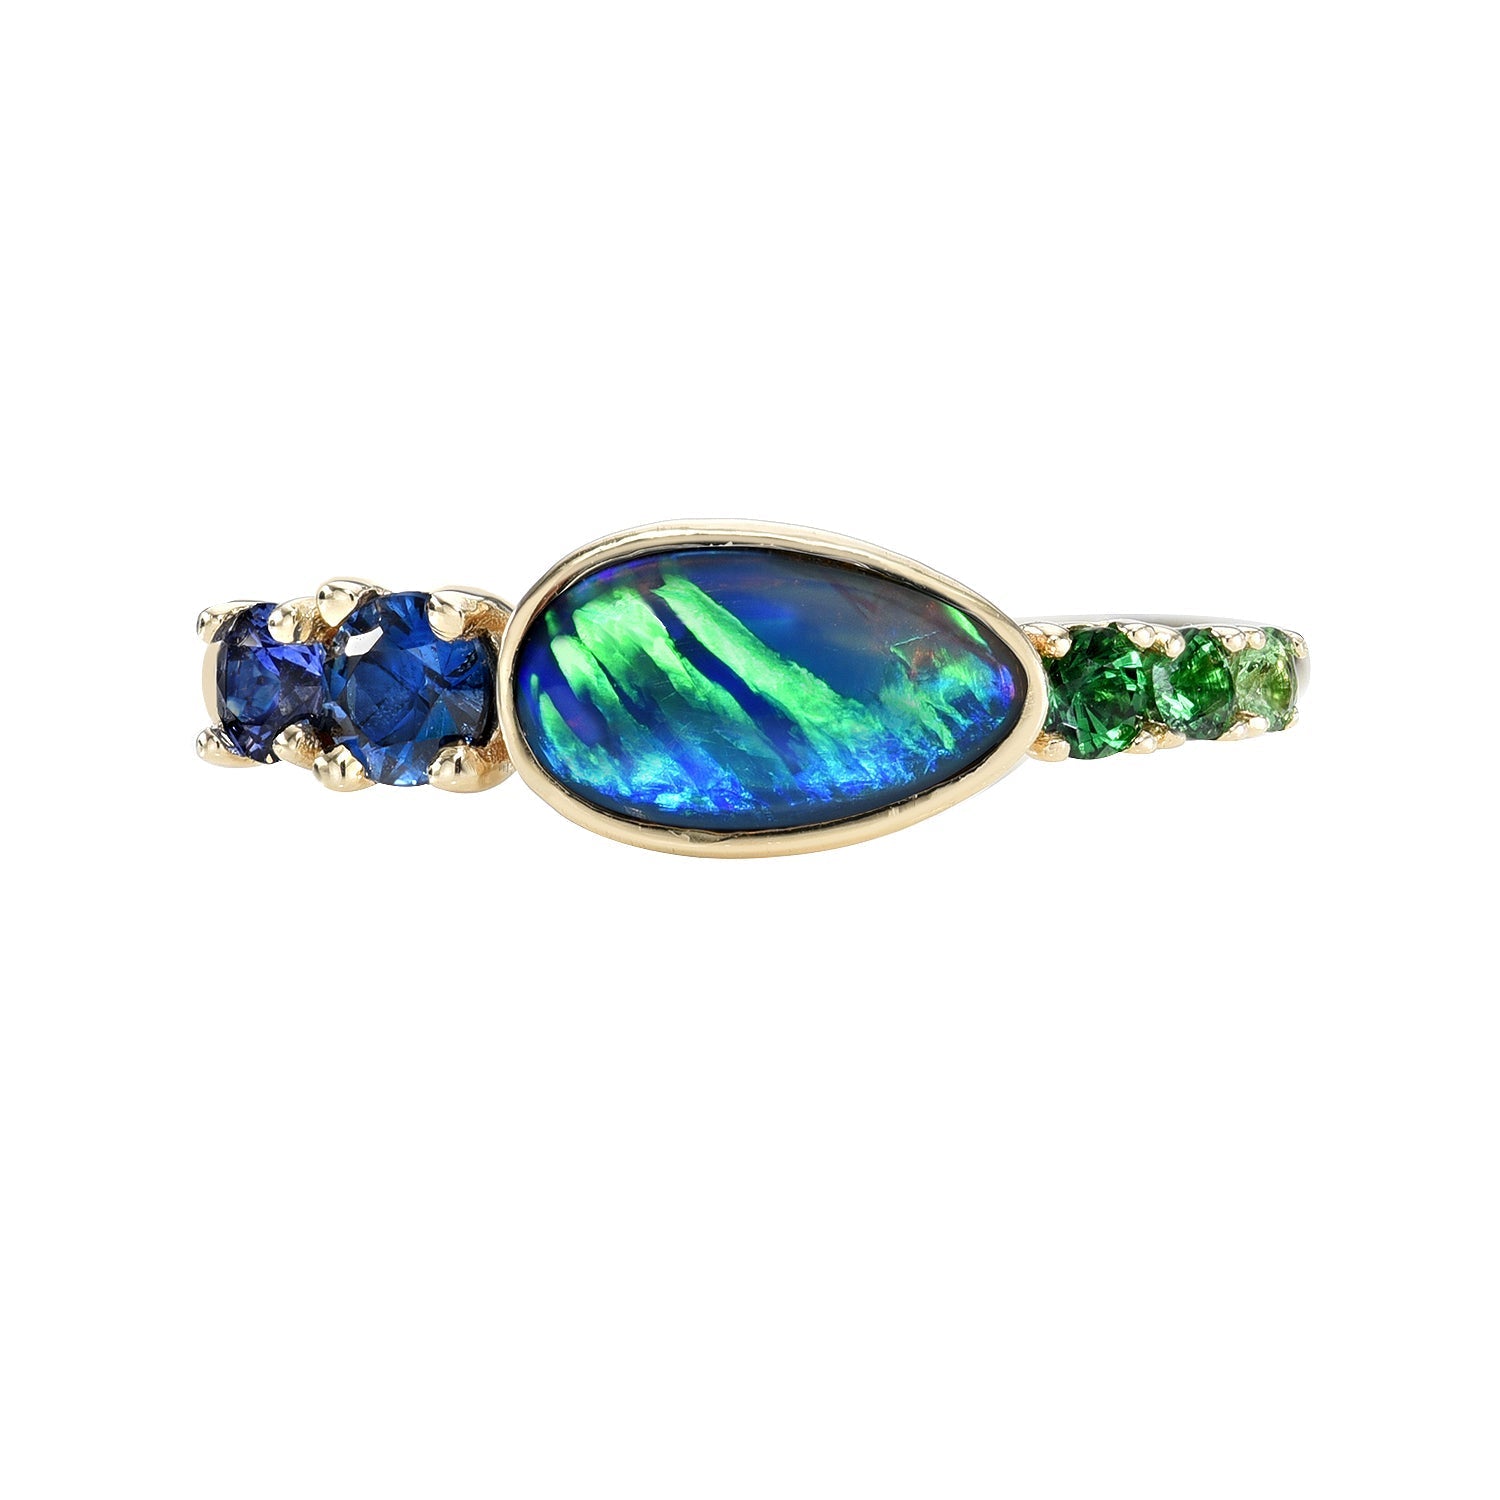 Black Opal Ring by NIXIN Jewelry on white background. Sapphire and opal ring.